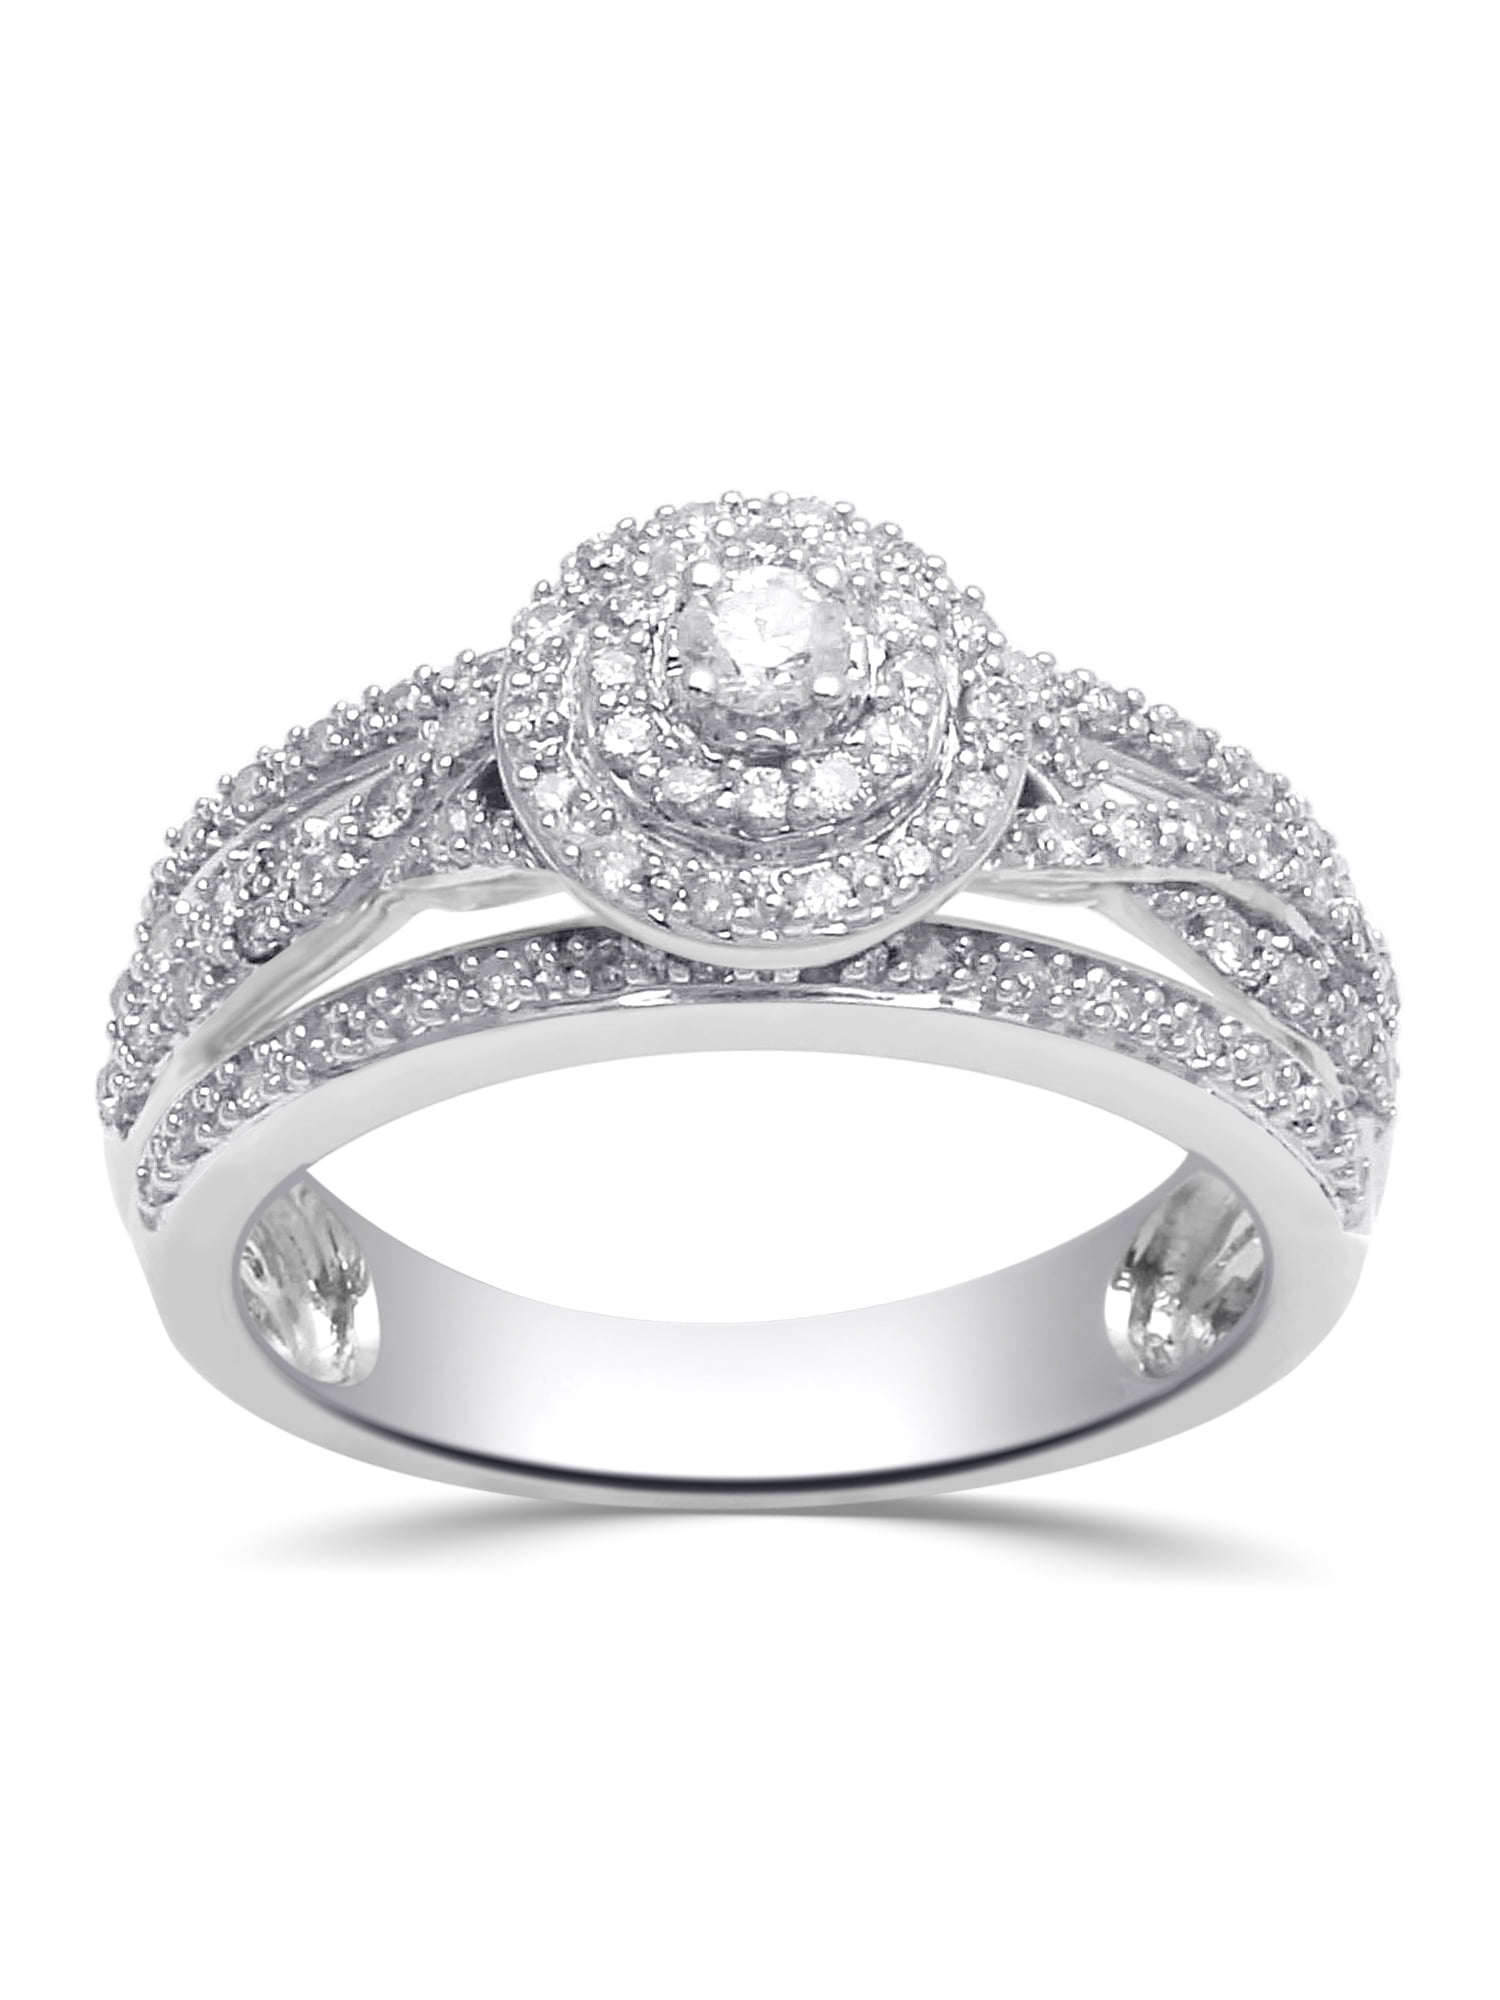 Forever Bride 1/2 Carat T.W. Diamond Sterling Silver Anniversary Ring